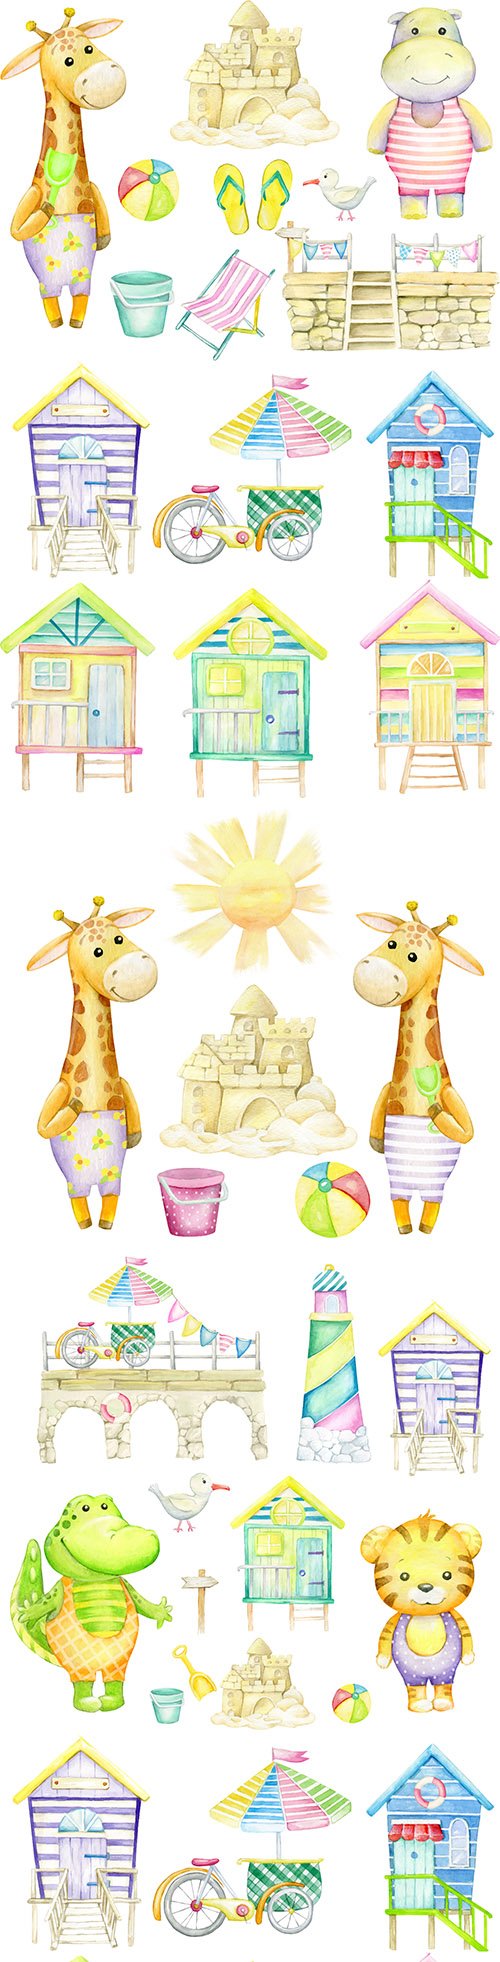 Giraffes, sun and castle of sand watercolor illustrations